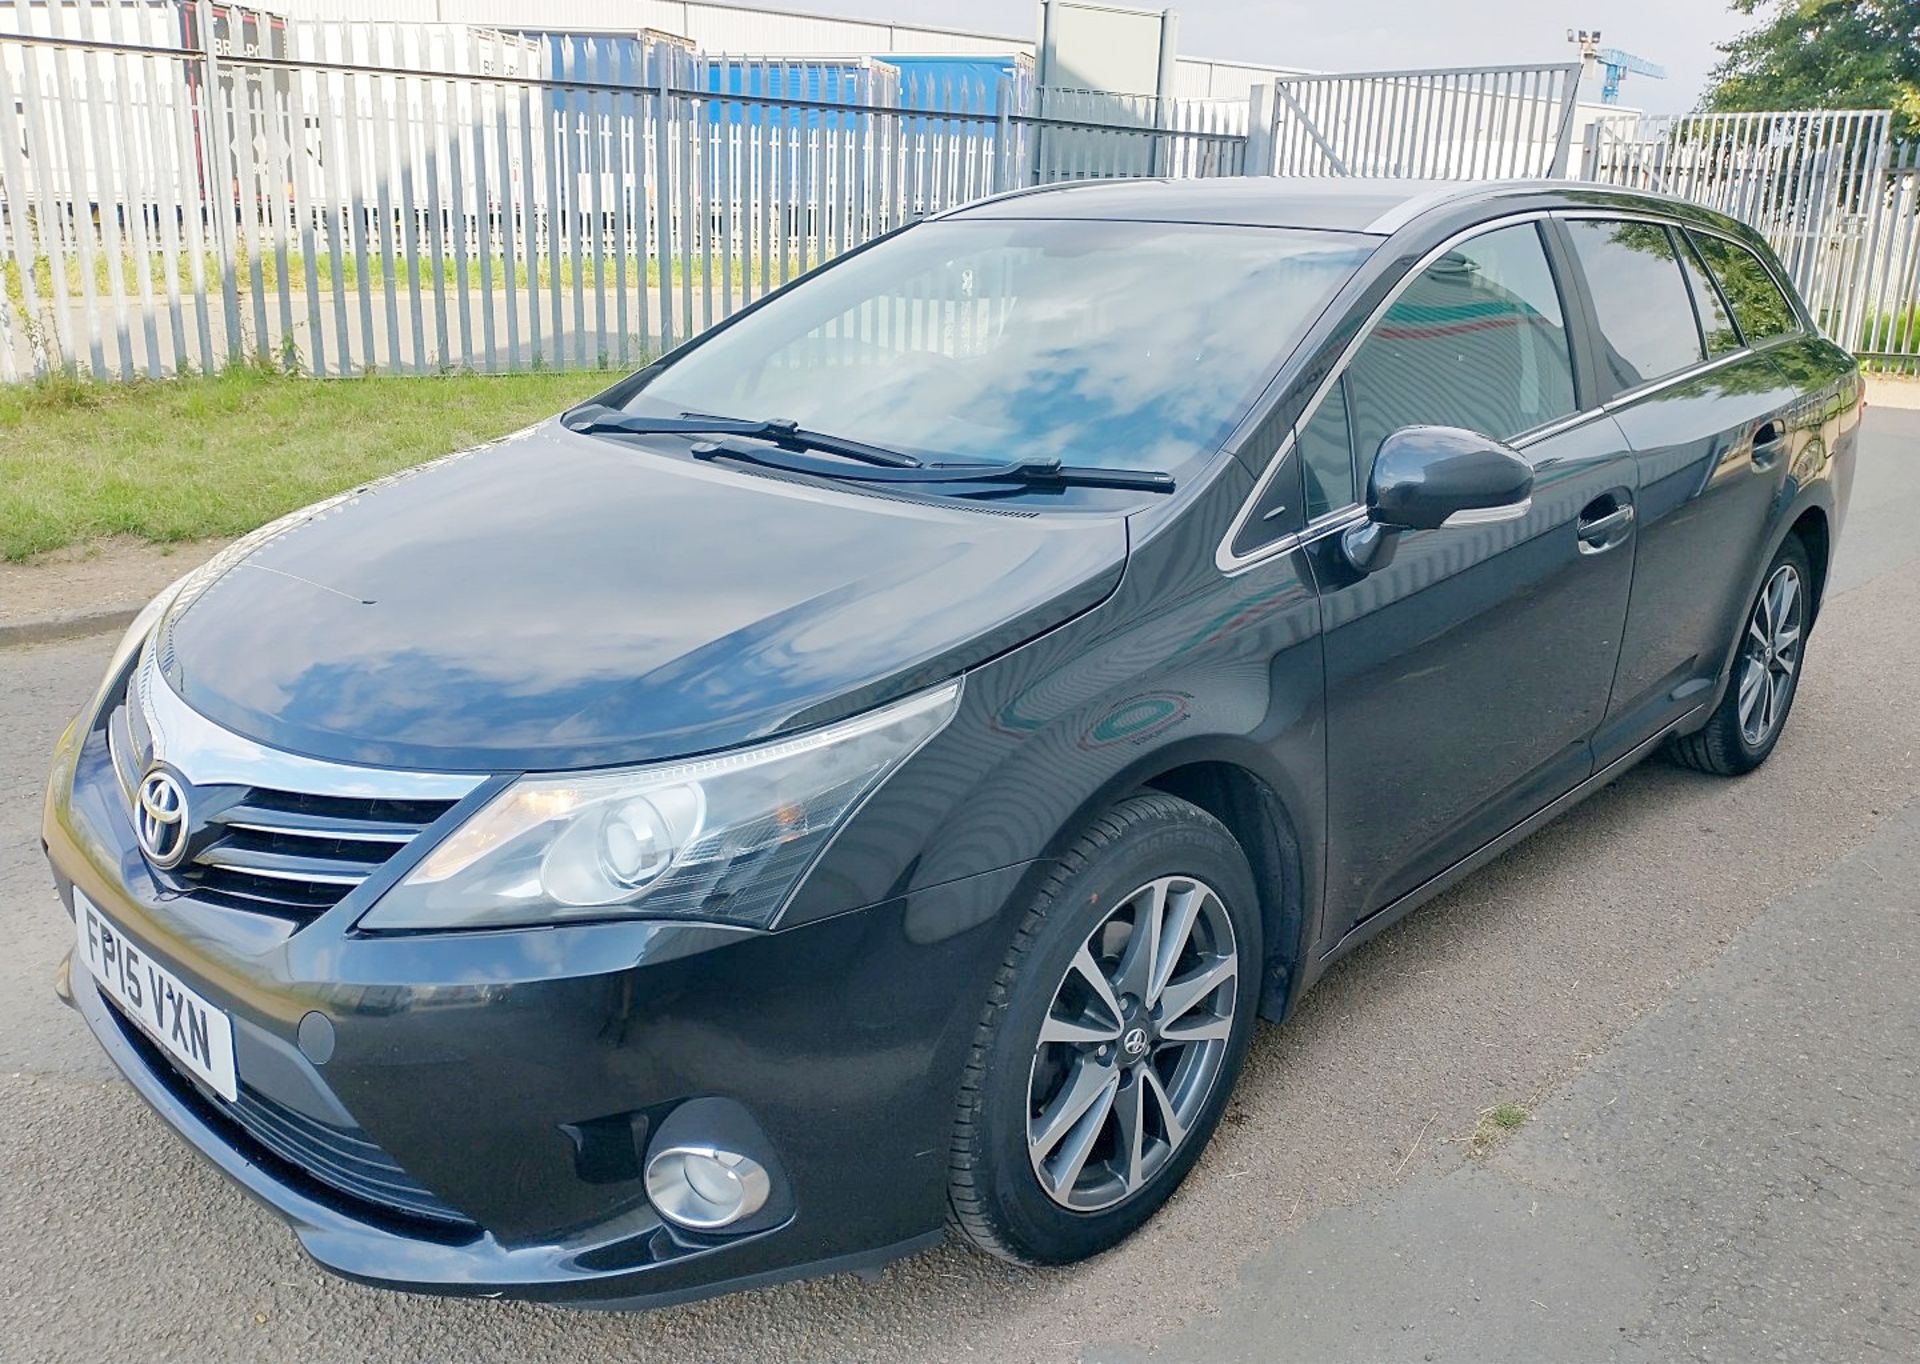 2015 Toyota Avensis Icon Business Ed D-40 5dr Estate  - CL505 - NO VAT ON THE HAMMER - Location: - Image 11 of 18